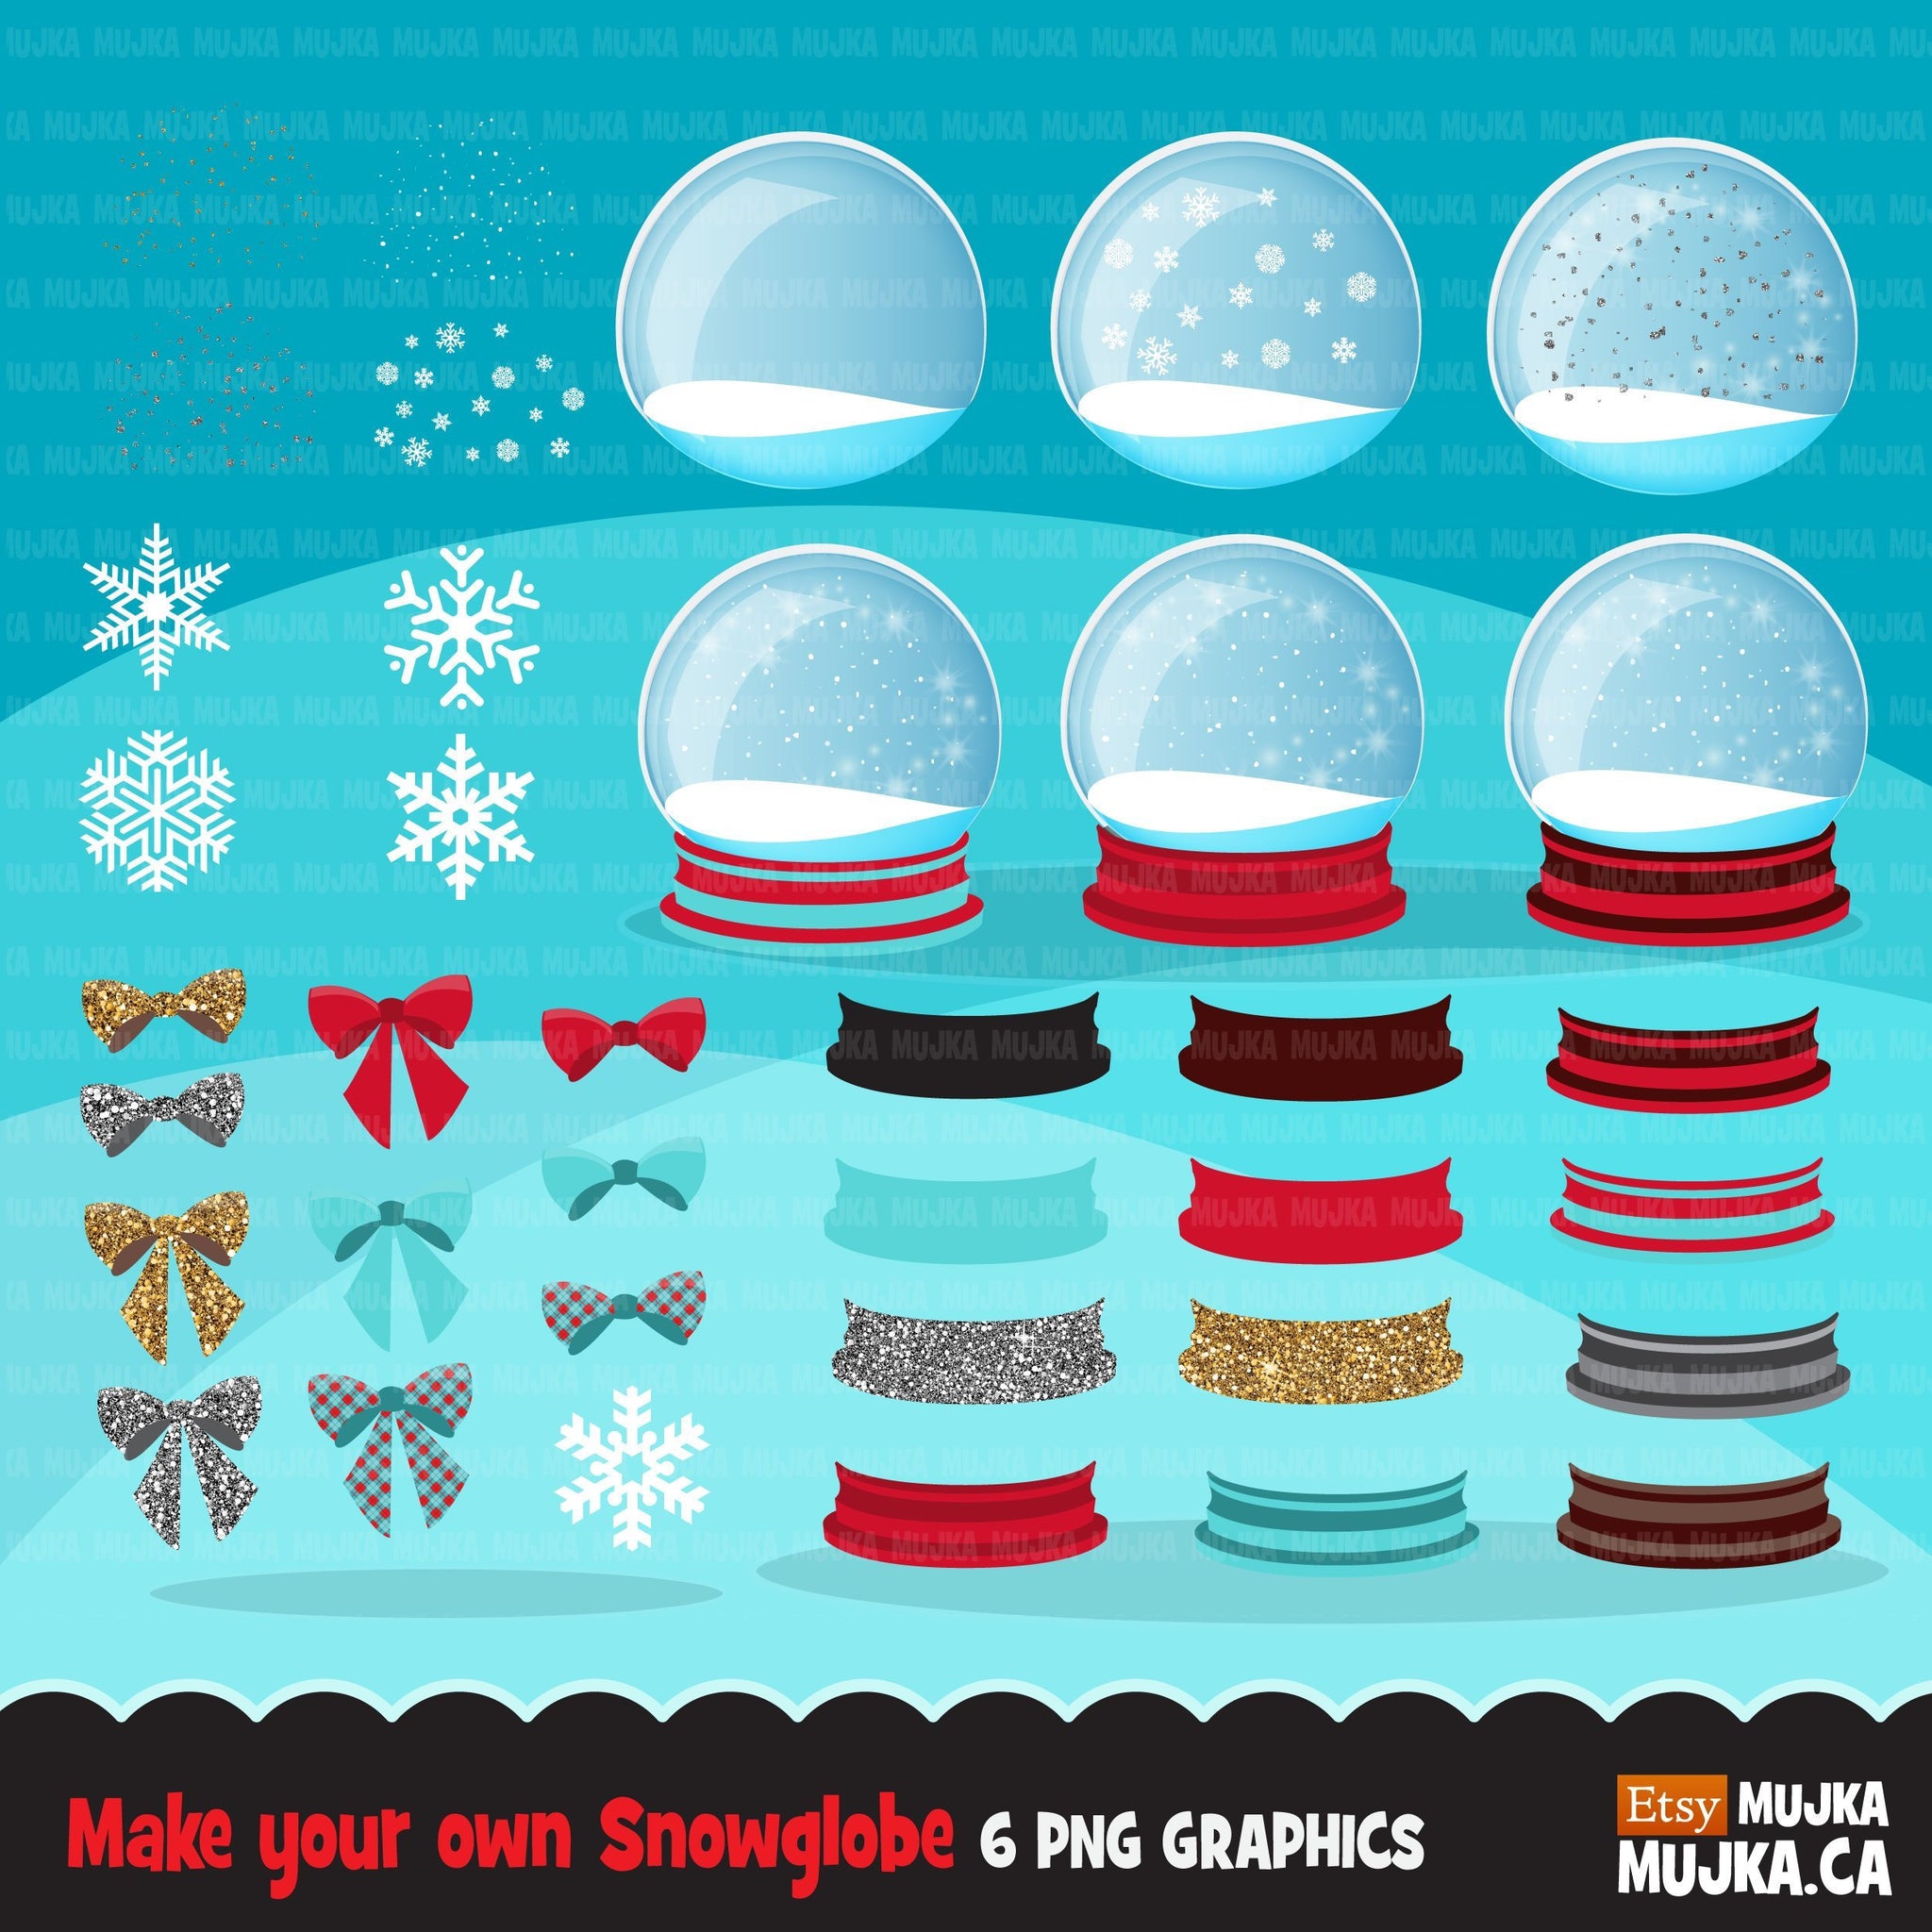 Christmas snow globe clipart winter, snow globe creator, make your own graphic